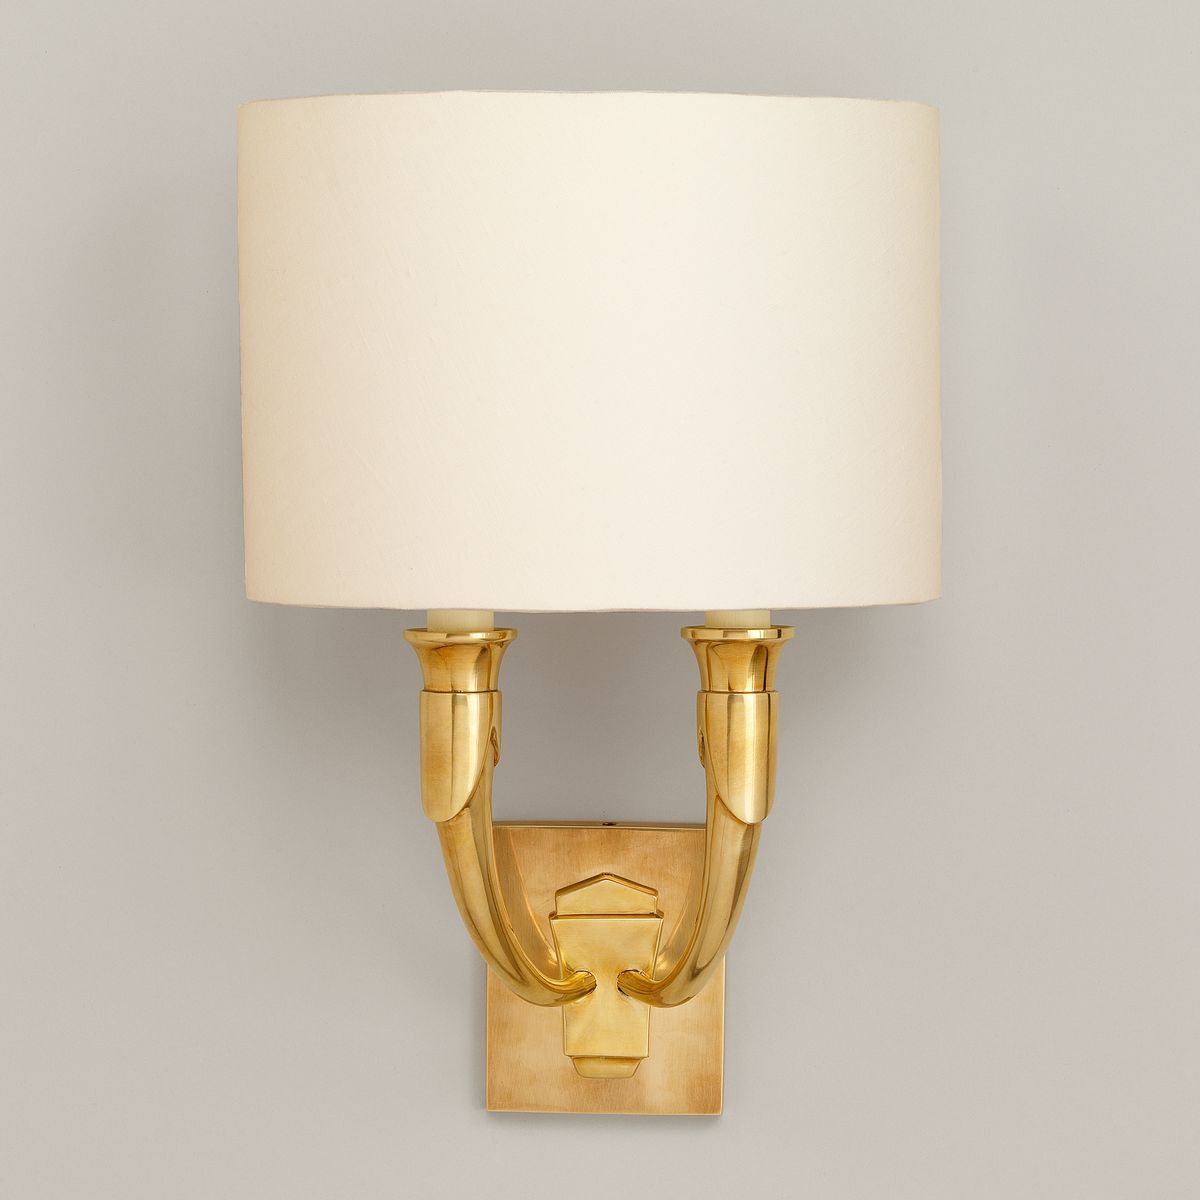 French Horn Wall Light / Vaughan